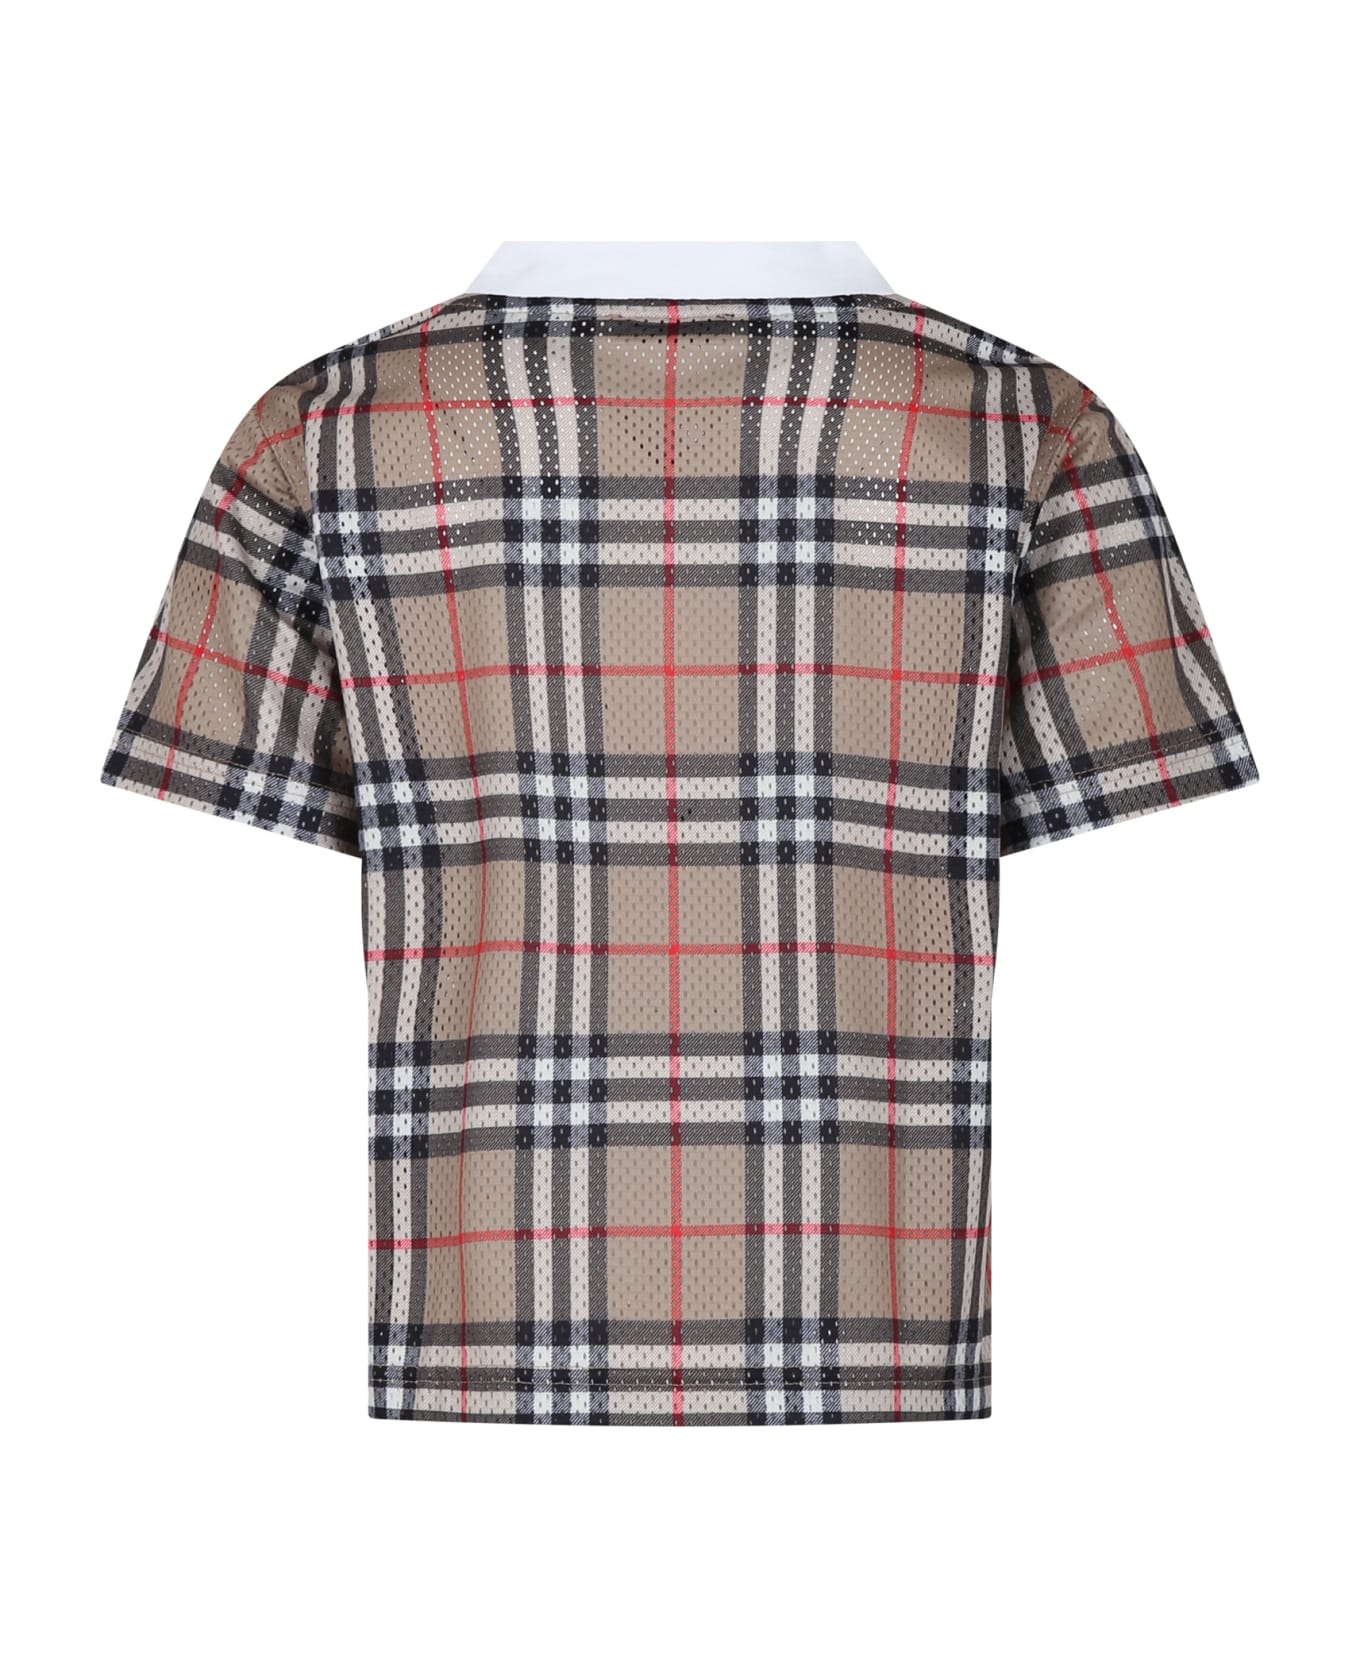 Burberry Beige T-shirt For Boy With Iconic Vintage Check - Beige